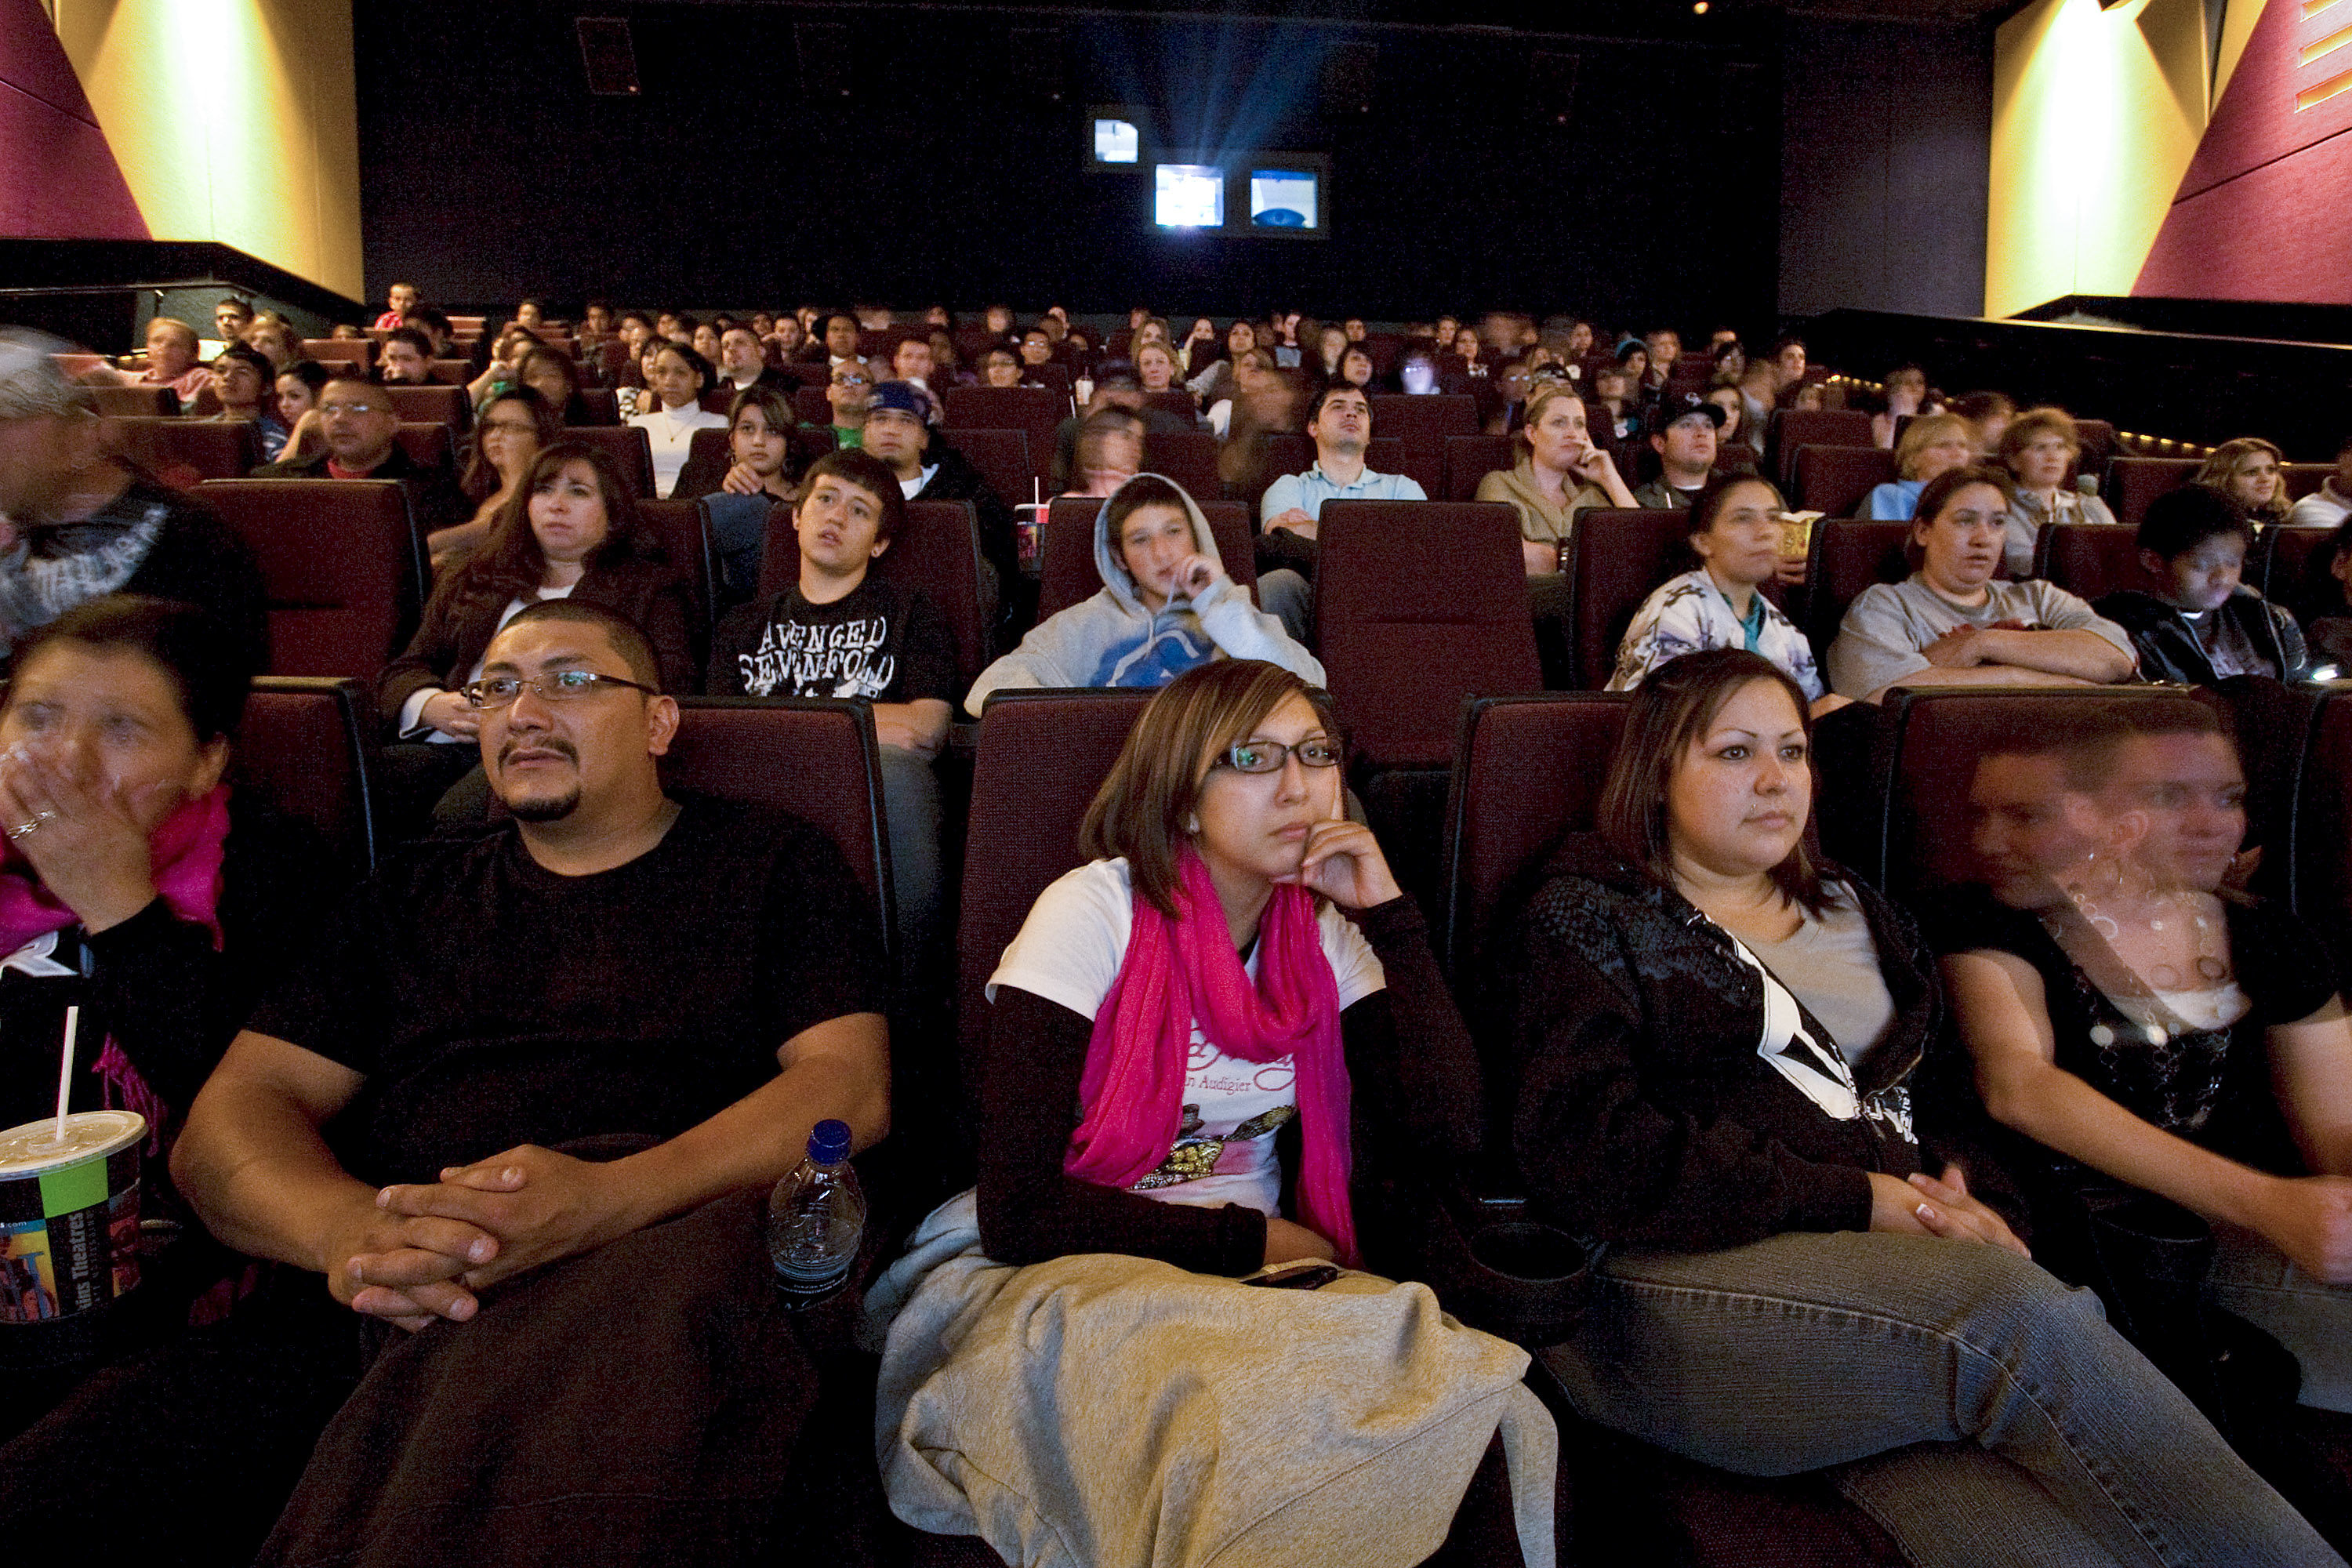 Movie-goers, from left, Michelle Vargas, Rudy Vargas, Brittany Vargas, Janelle Bonilla, and Tiffany McIntosh watch previews at a Harkins movie theater in Denver, Colorado, U.S., on Friday, Oct. 16, 2009. (Bloomberg—Bloomberg via Getty Images)